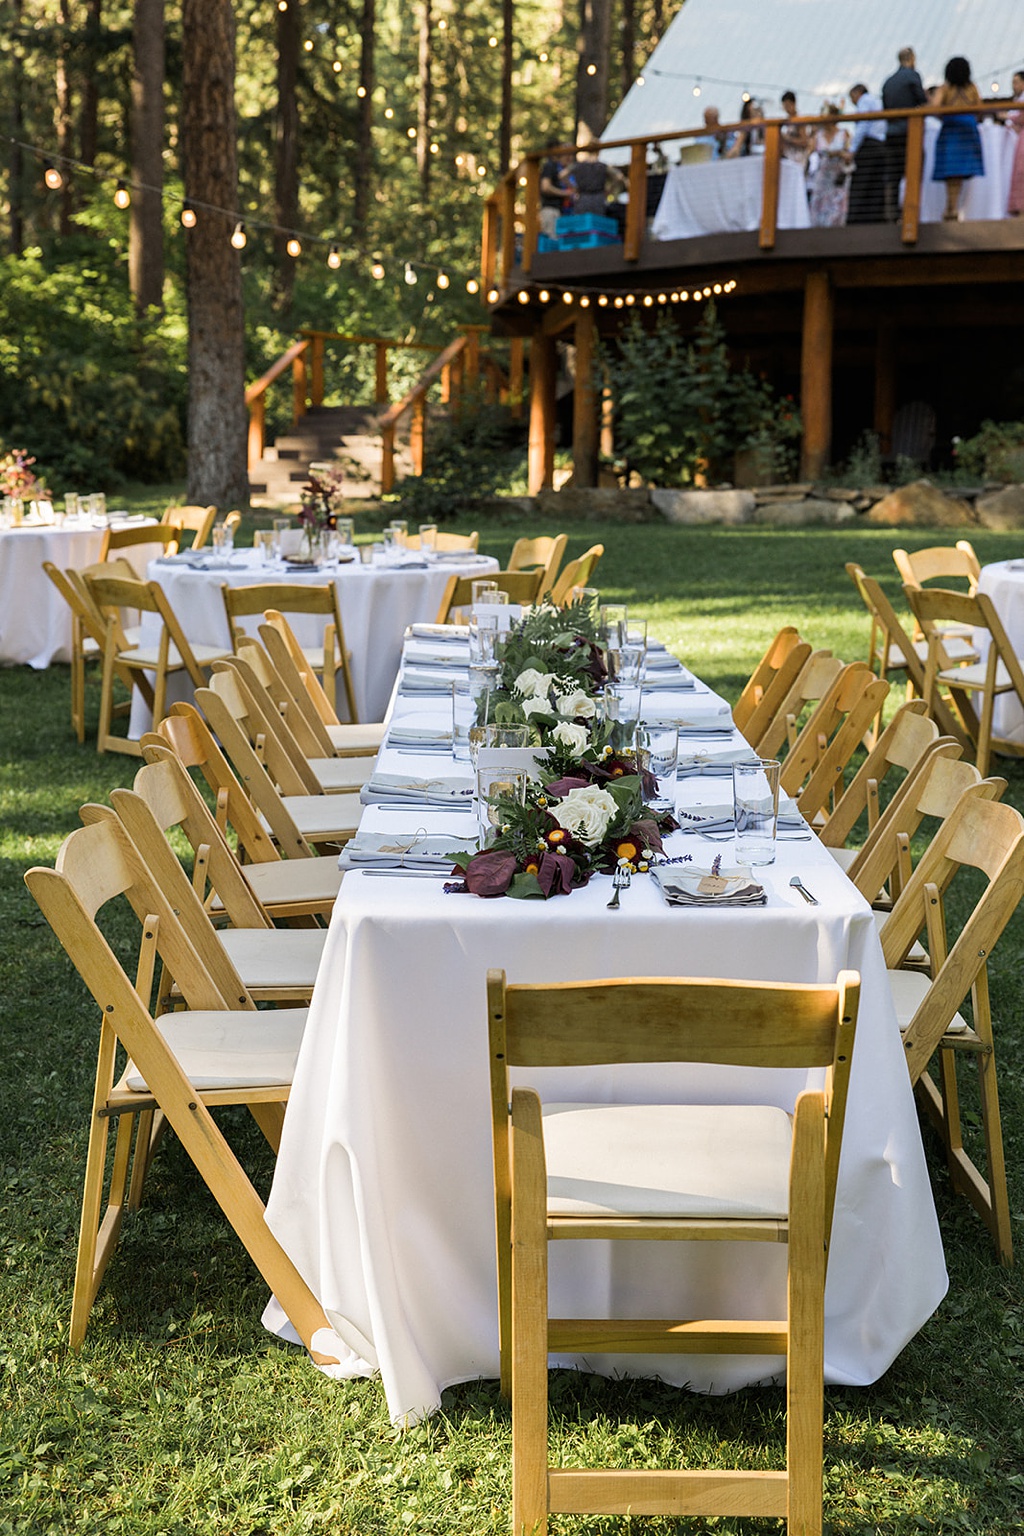 Wedding florals drape the long tables at this Tierra Retreat Center wedding